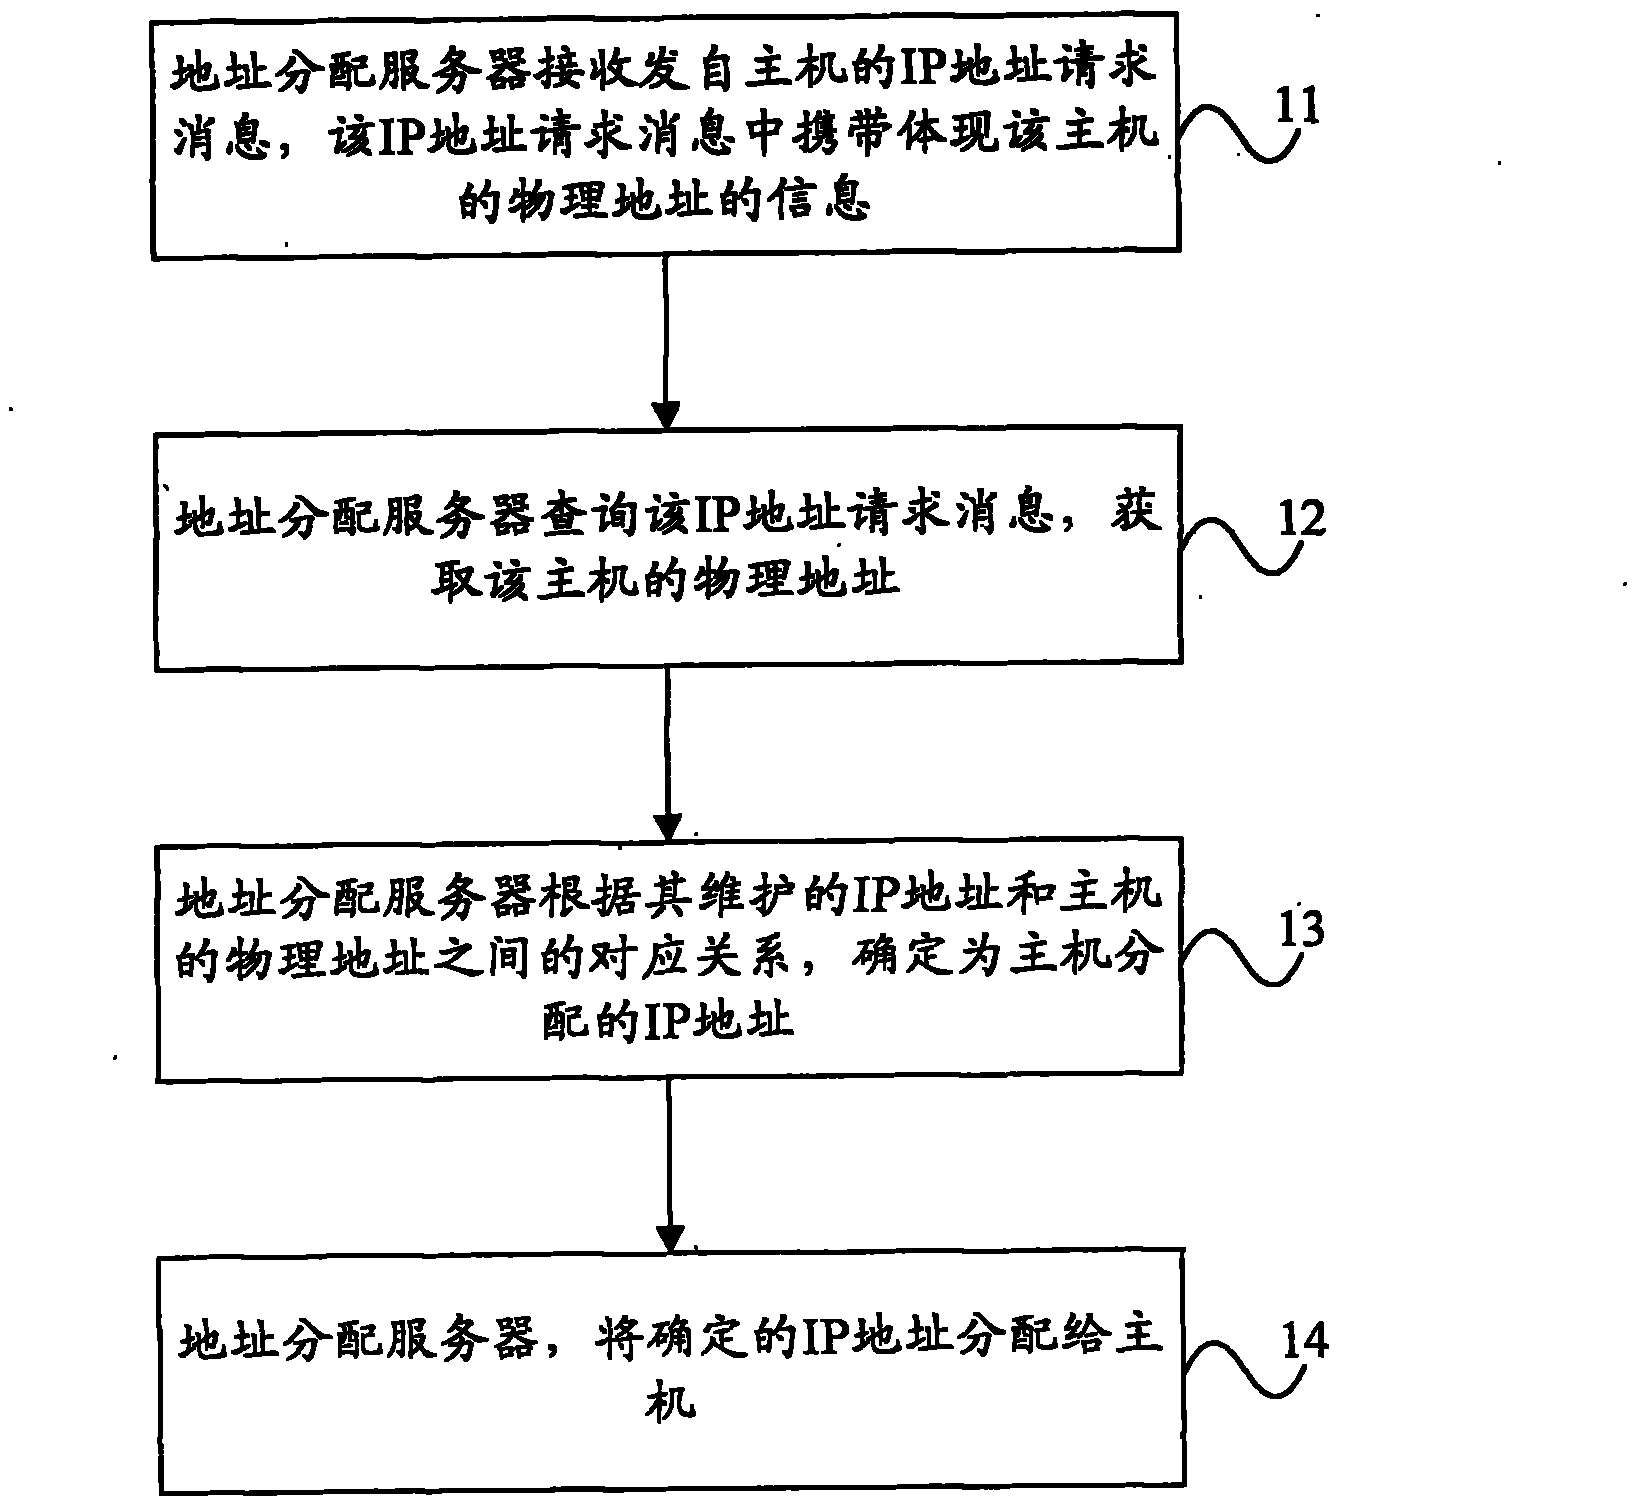 Method for allocating and configuring address, address allocation server and host machine